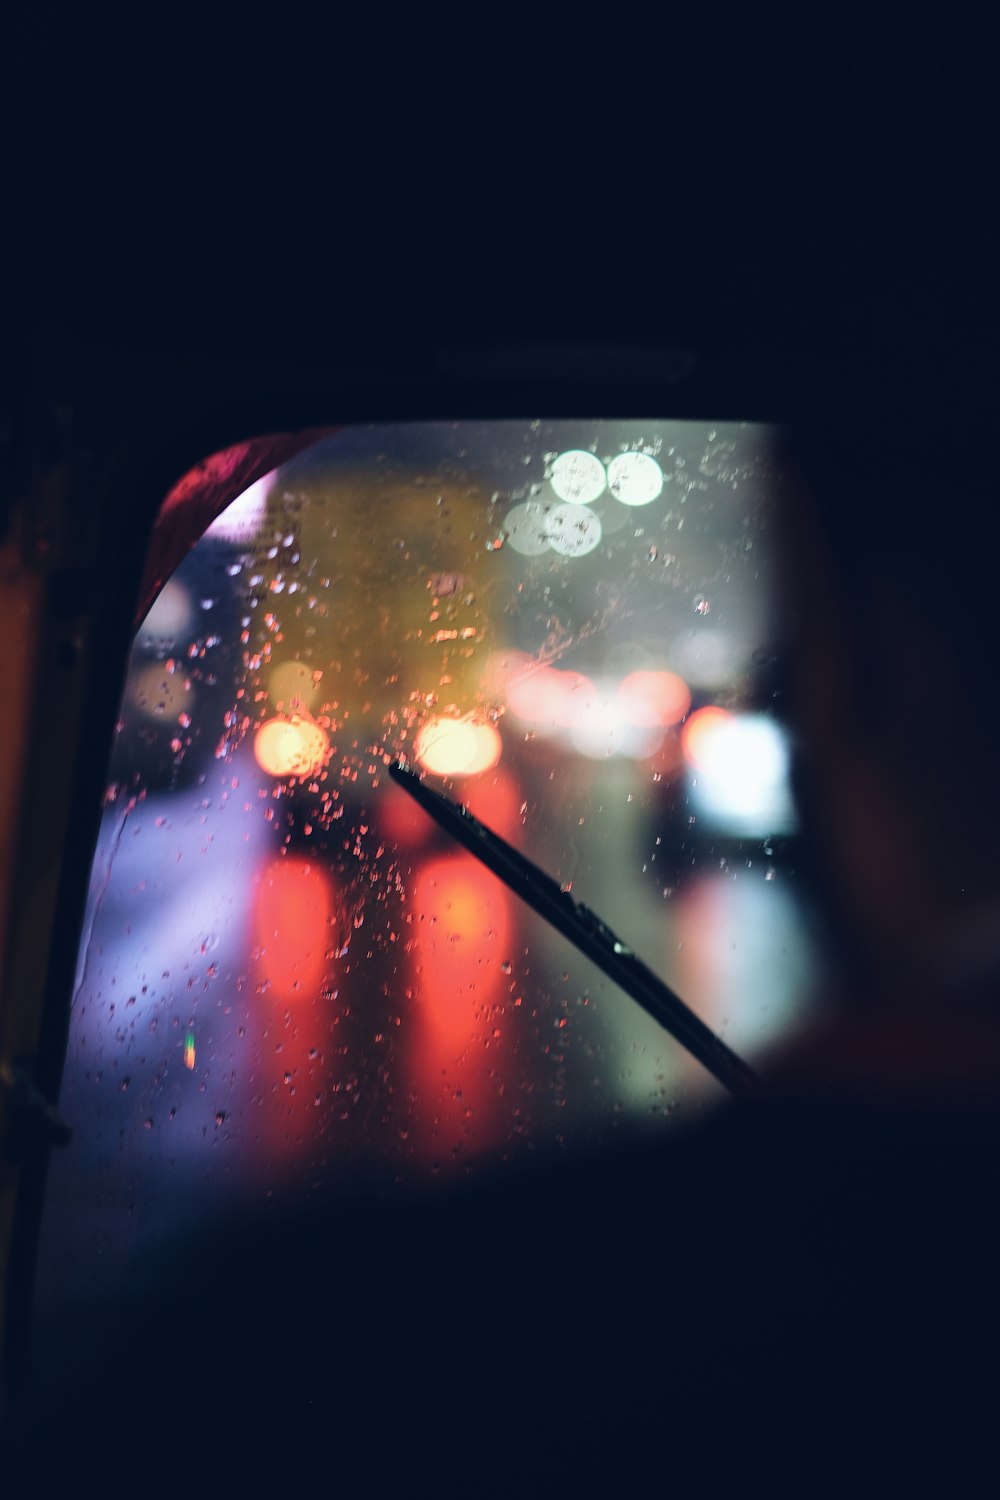 a view of a rainy street from inside a car